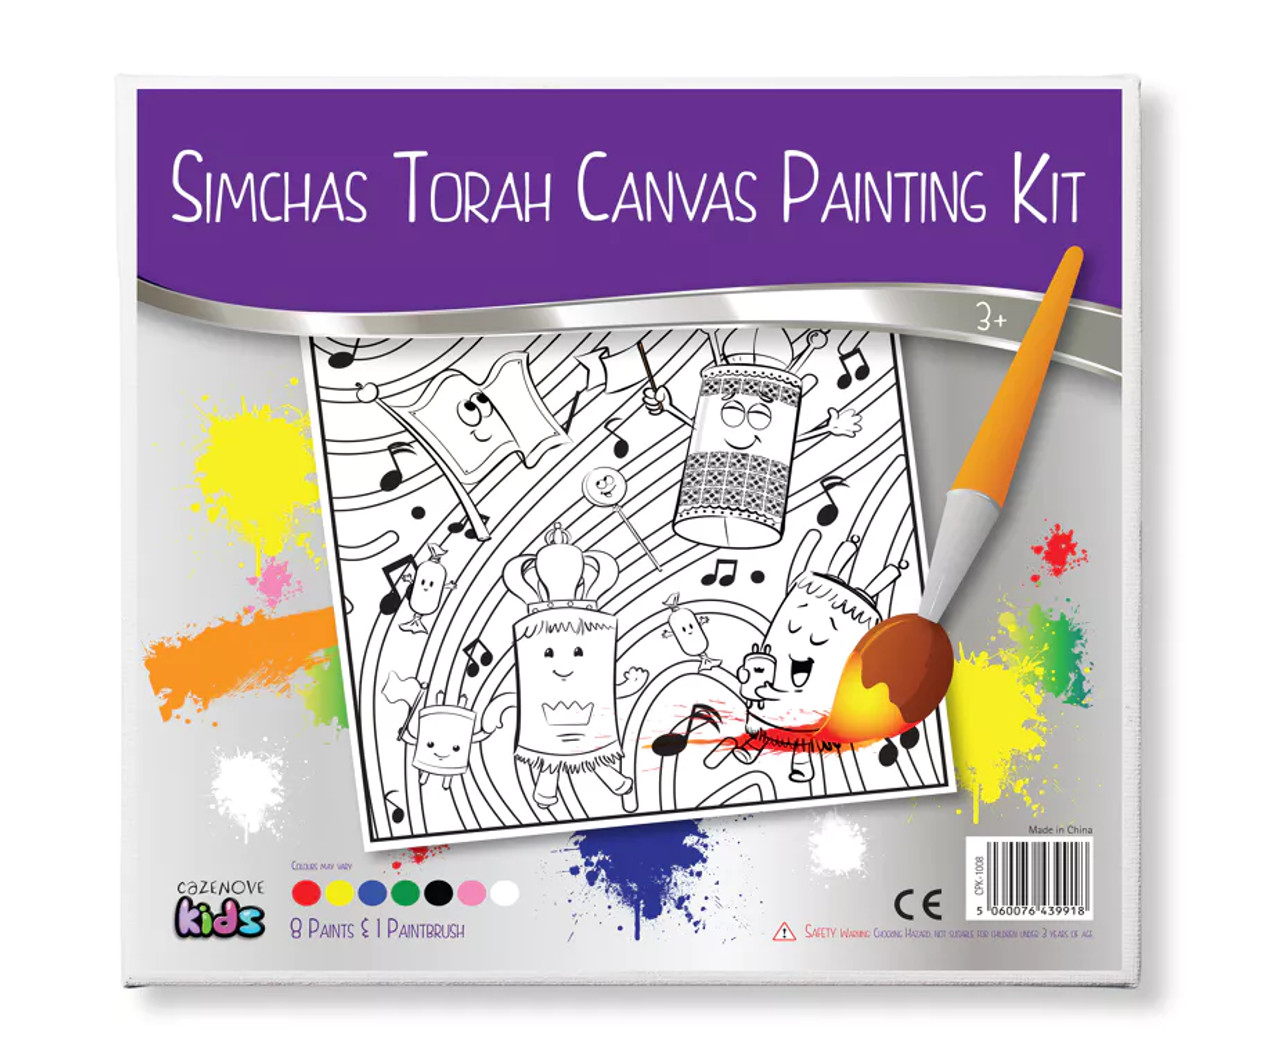 Simchas Torah Canvas Painting Kit - As low as $4.59 - New